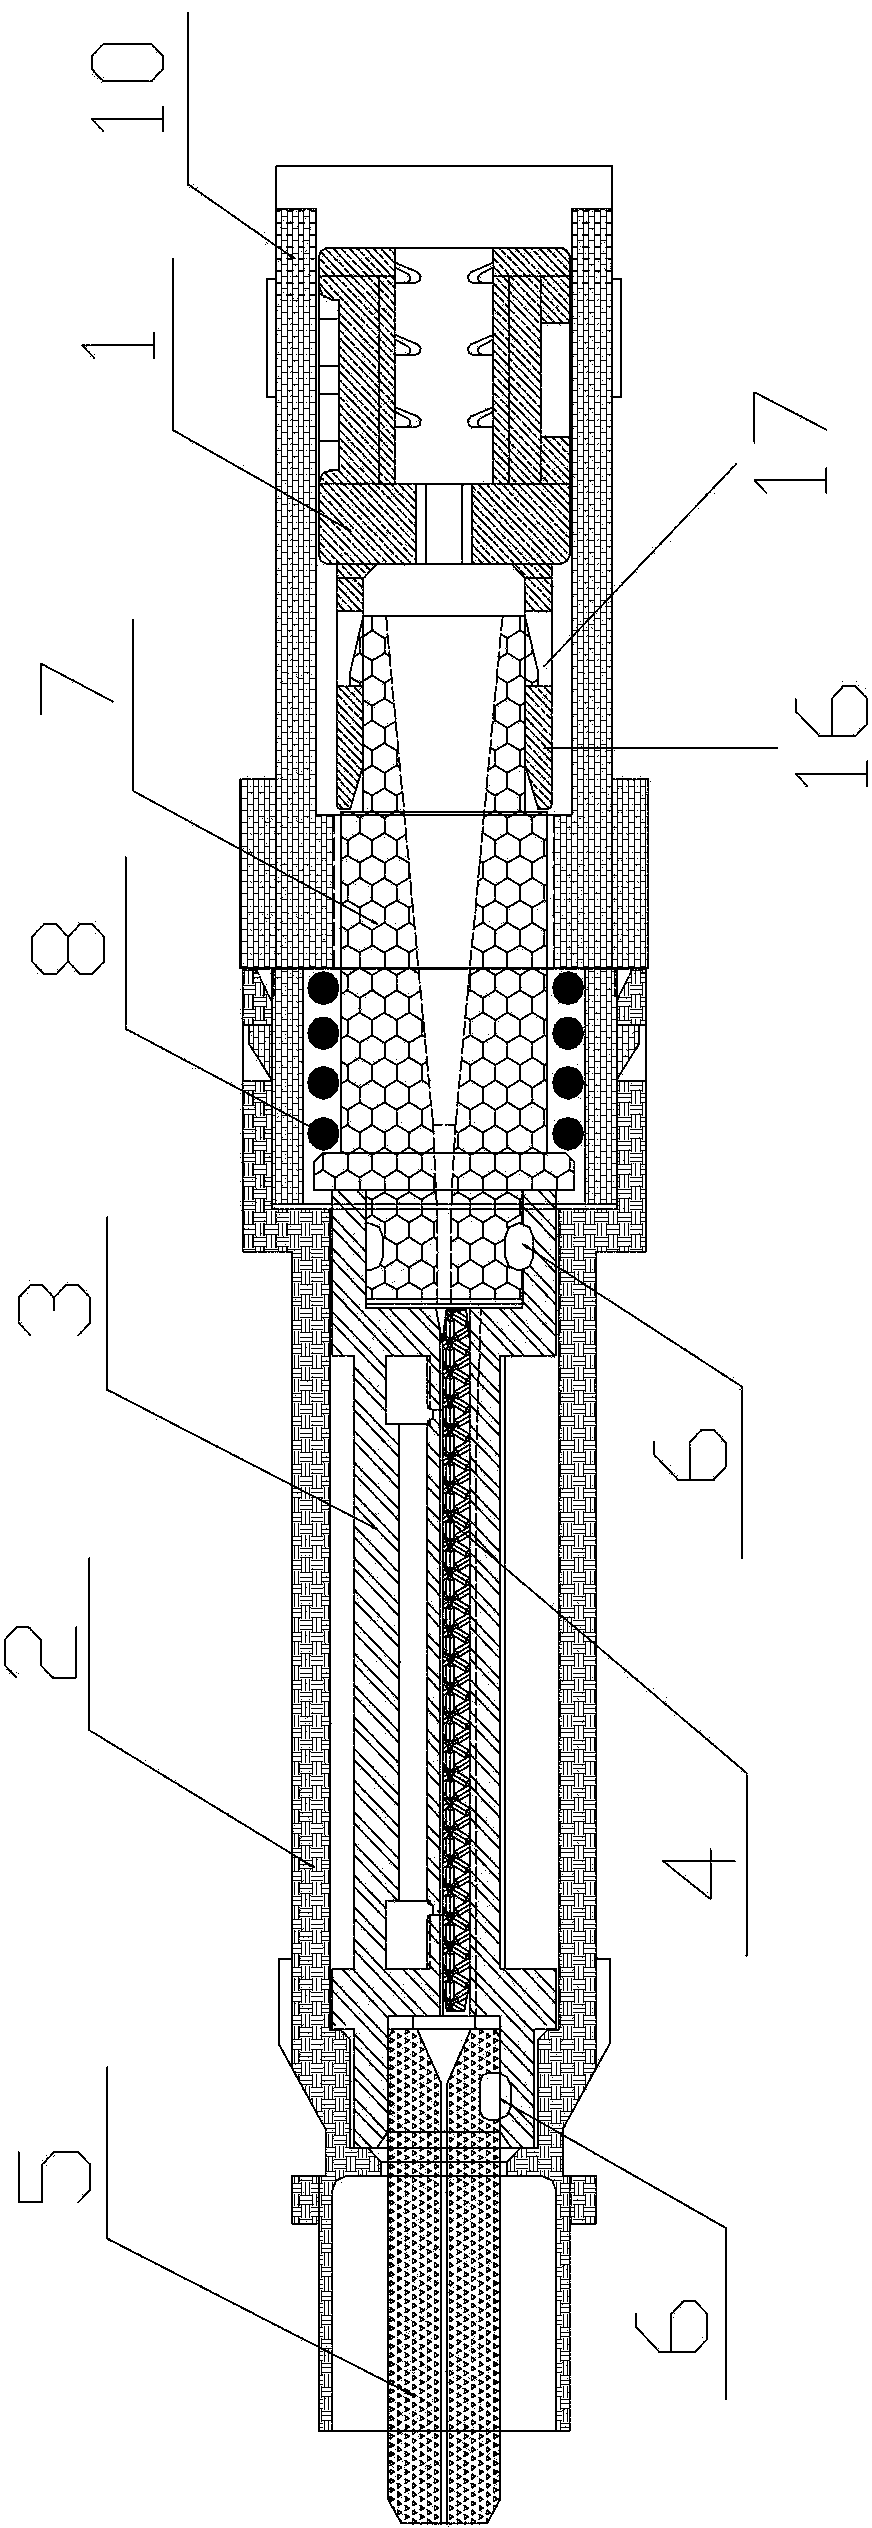 Field assembly type optical fiber connector